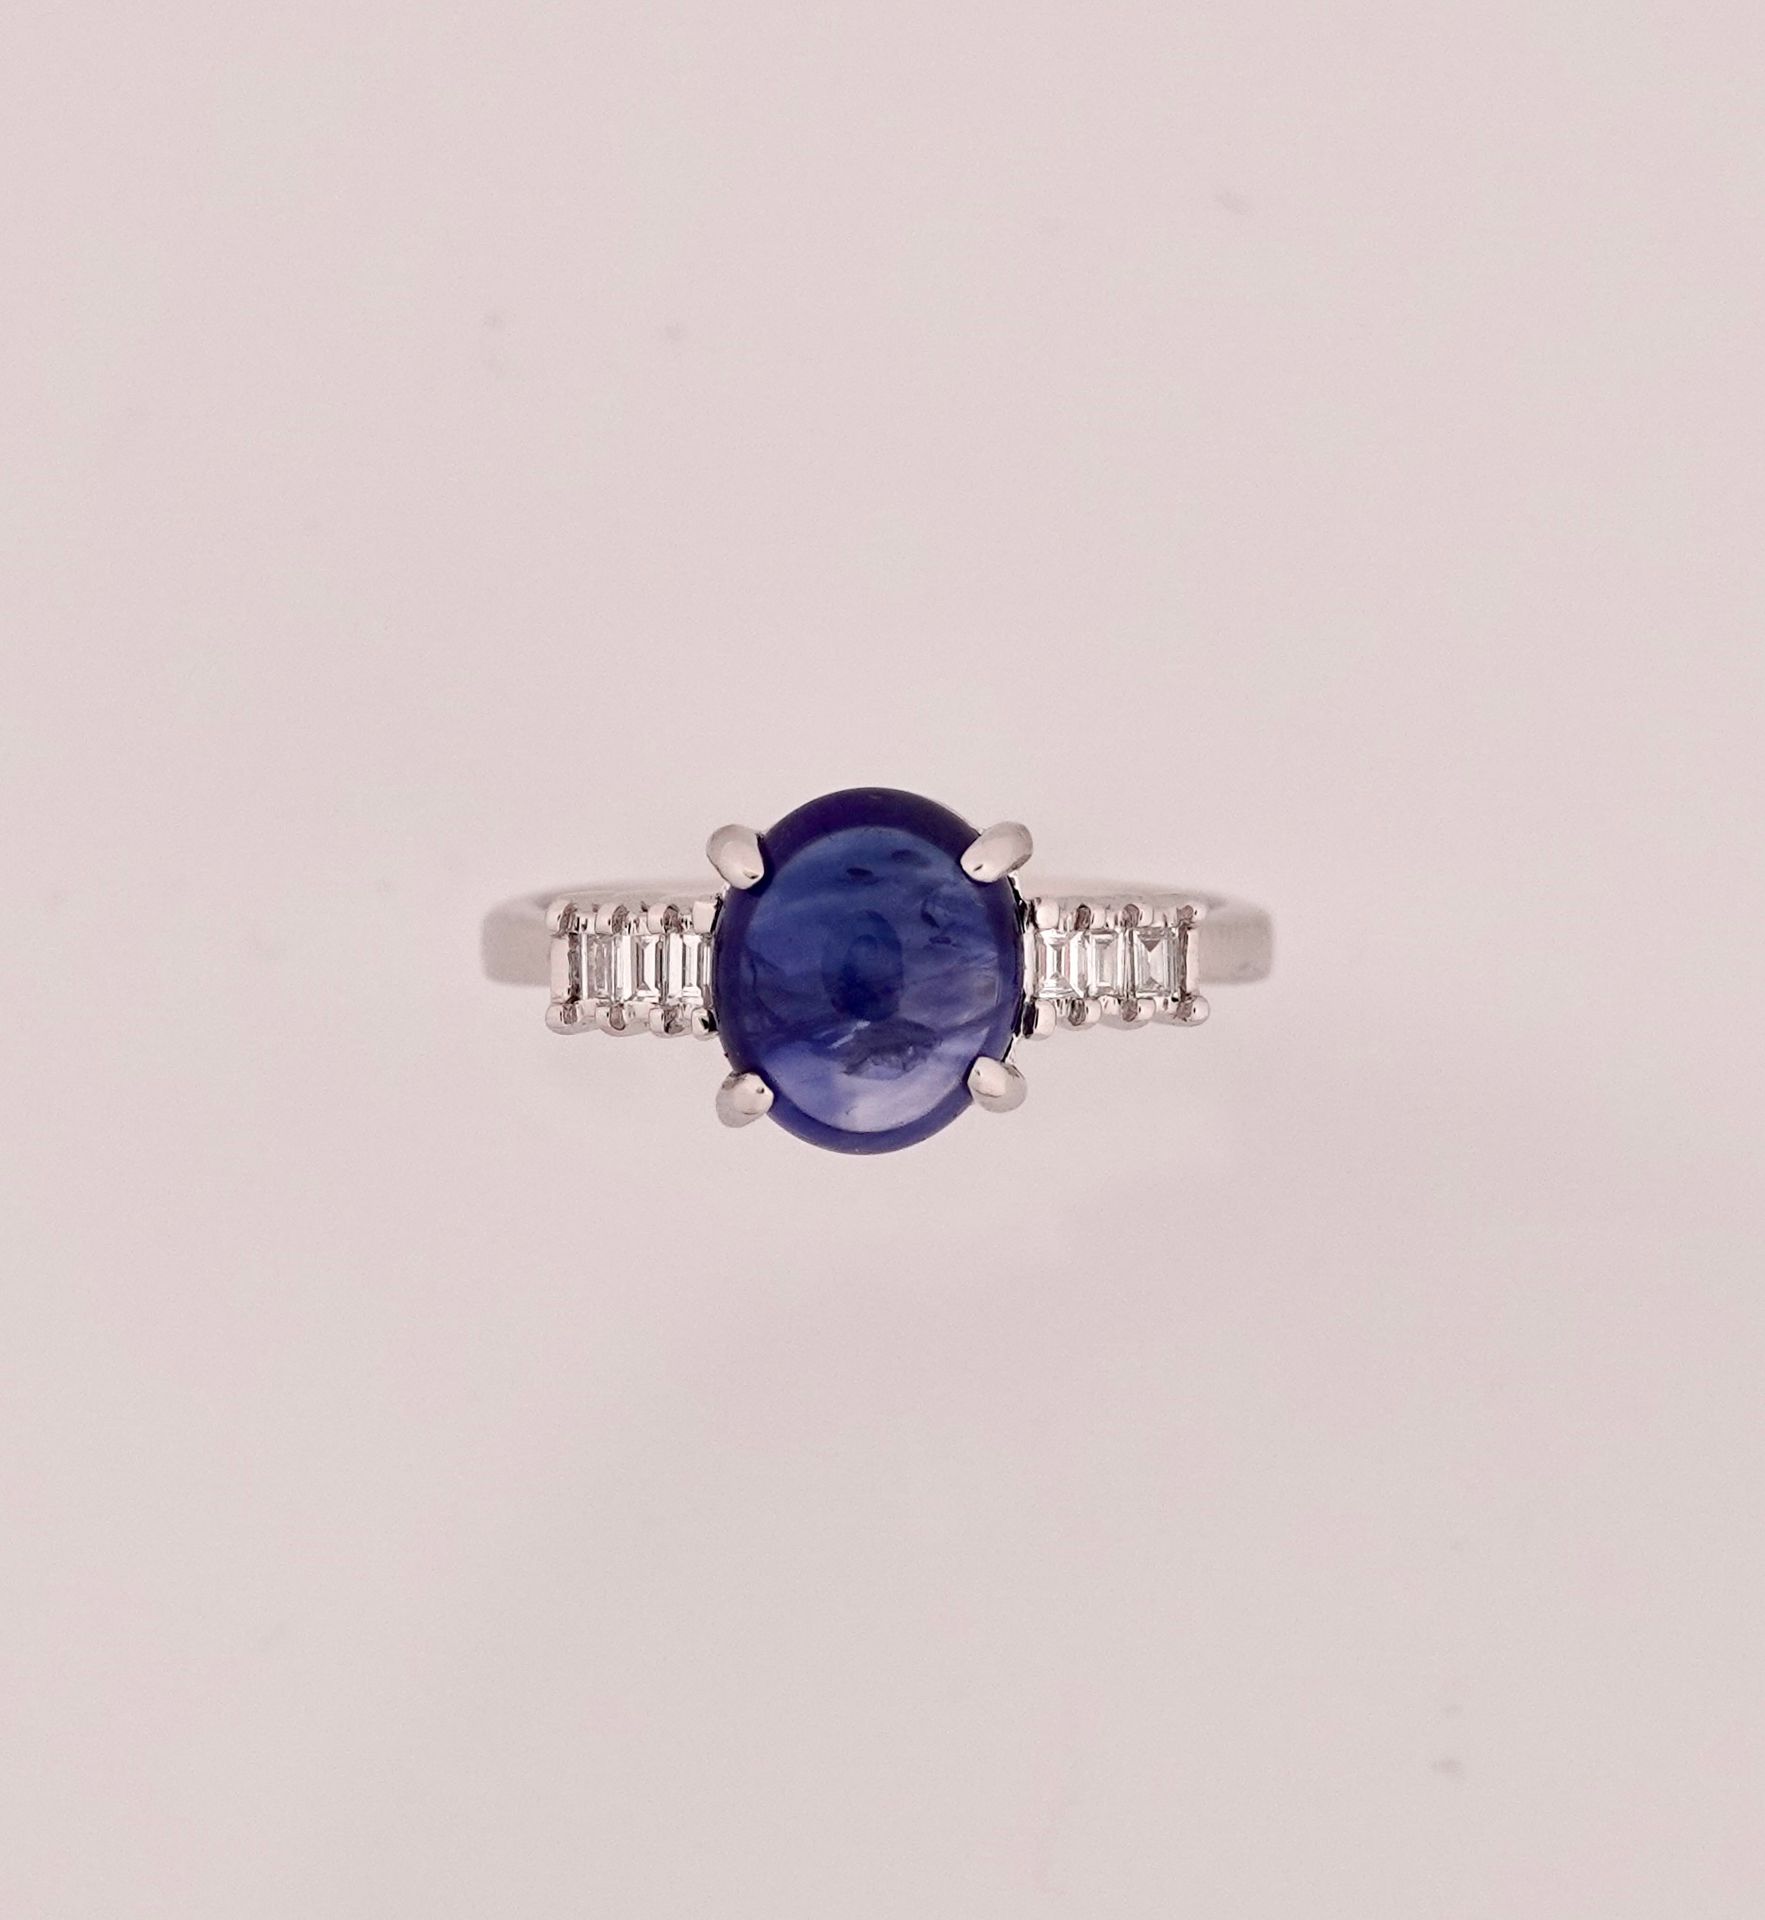 Null Ring in white gold, 750 MM, set with a cabochon sapphire weighing 2.90 cara&hellip;